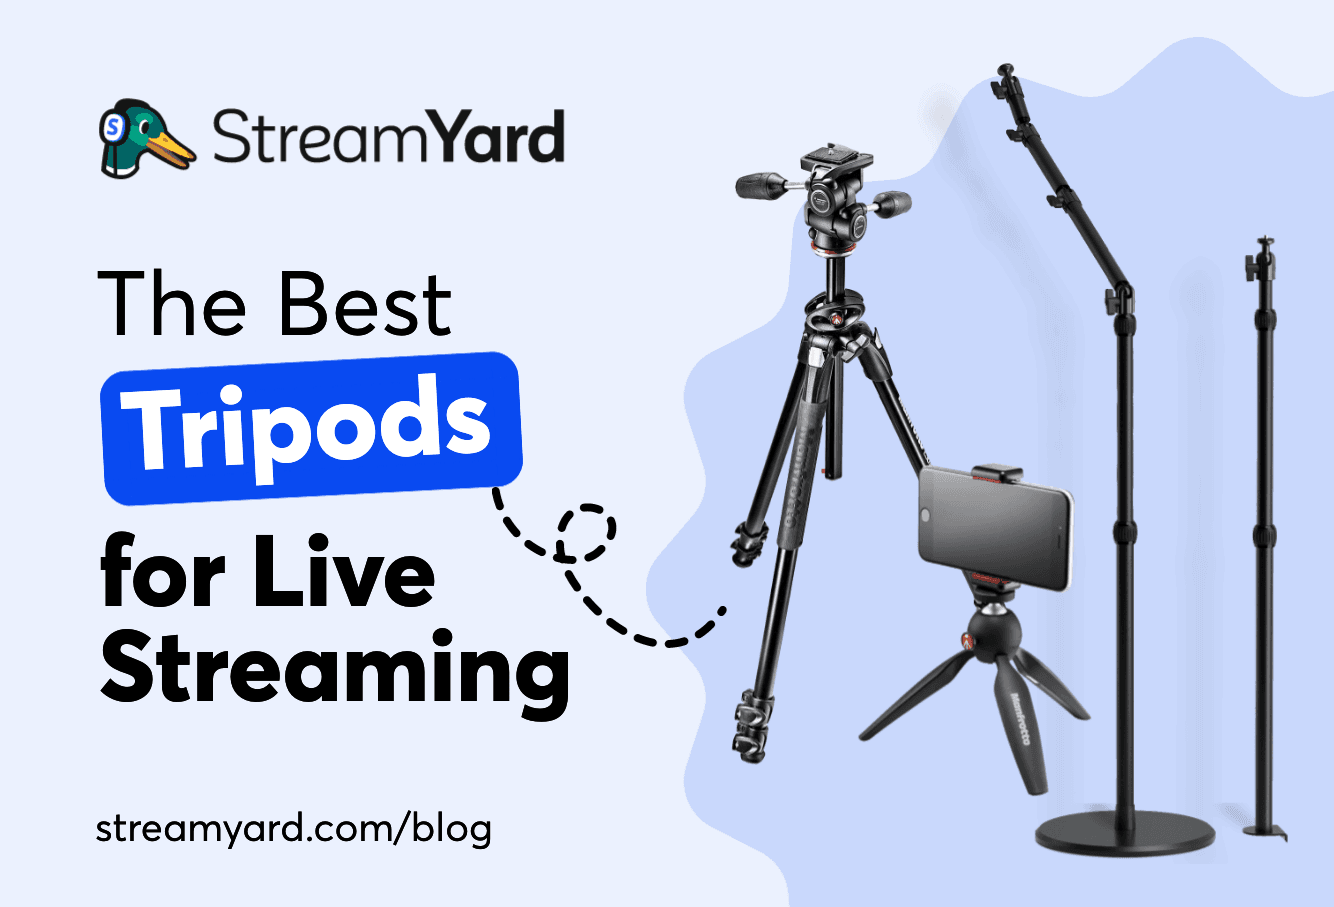 Learn about the best tripods for live streaming, to help position your DSLR or webcam at the optimal height when you're on-screen.